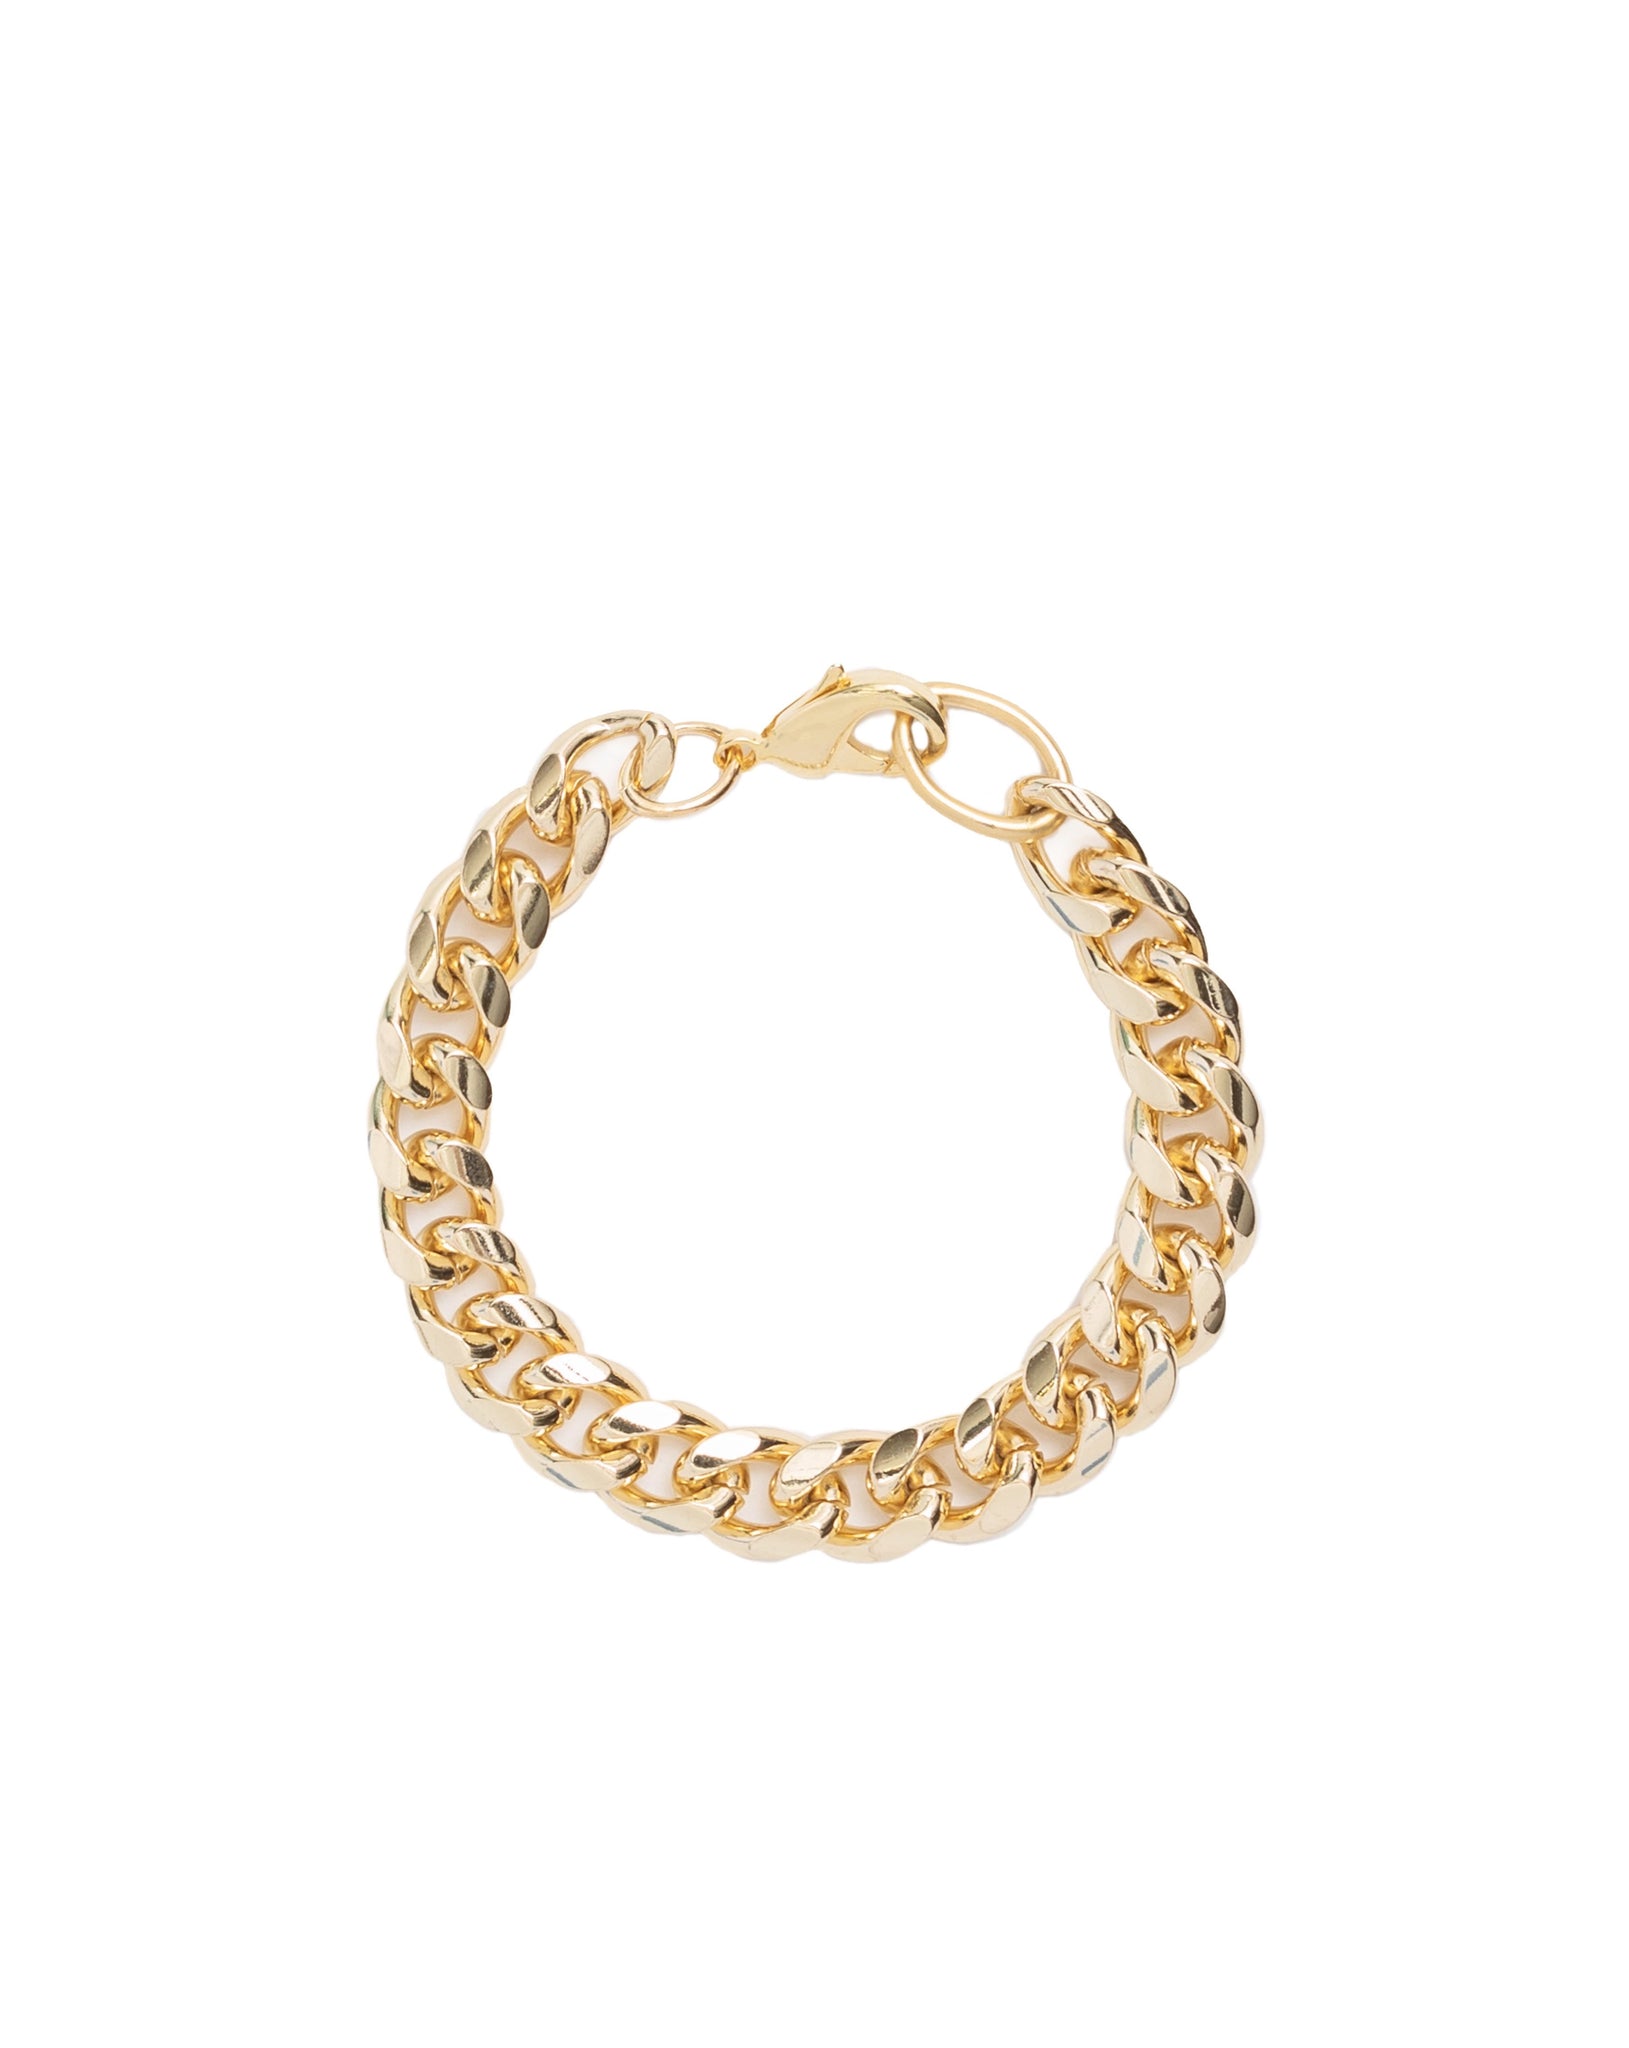 Buy Bold Gold Women Chain Bracelet, Thick Chain Bracelet, Gold Chunky  Toggle Chain Link Bracelet With Large Dangling Heart Charm Online in India  - Etsy